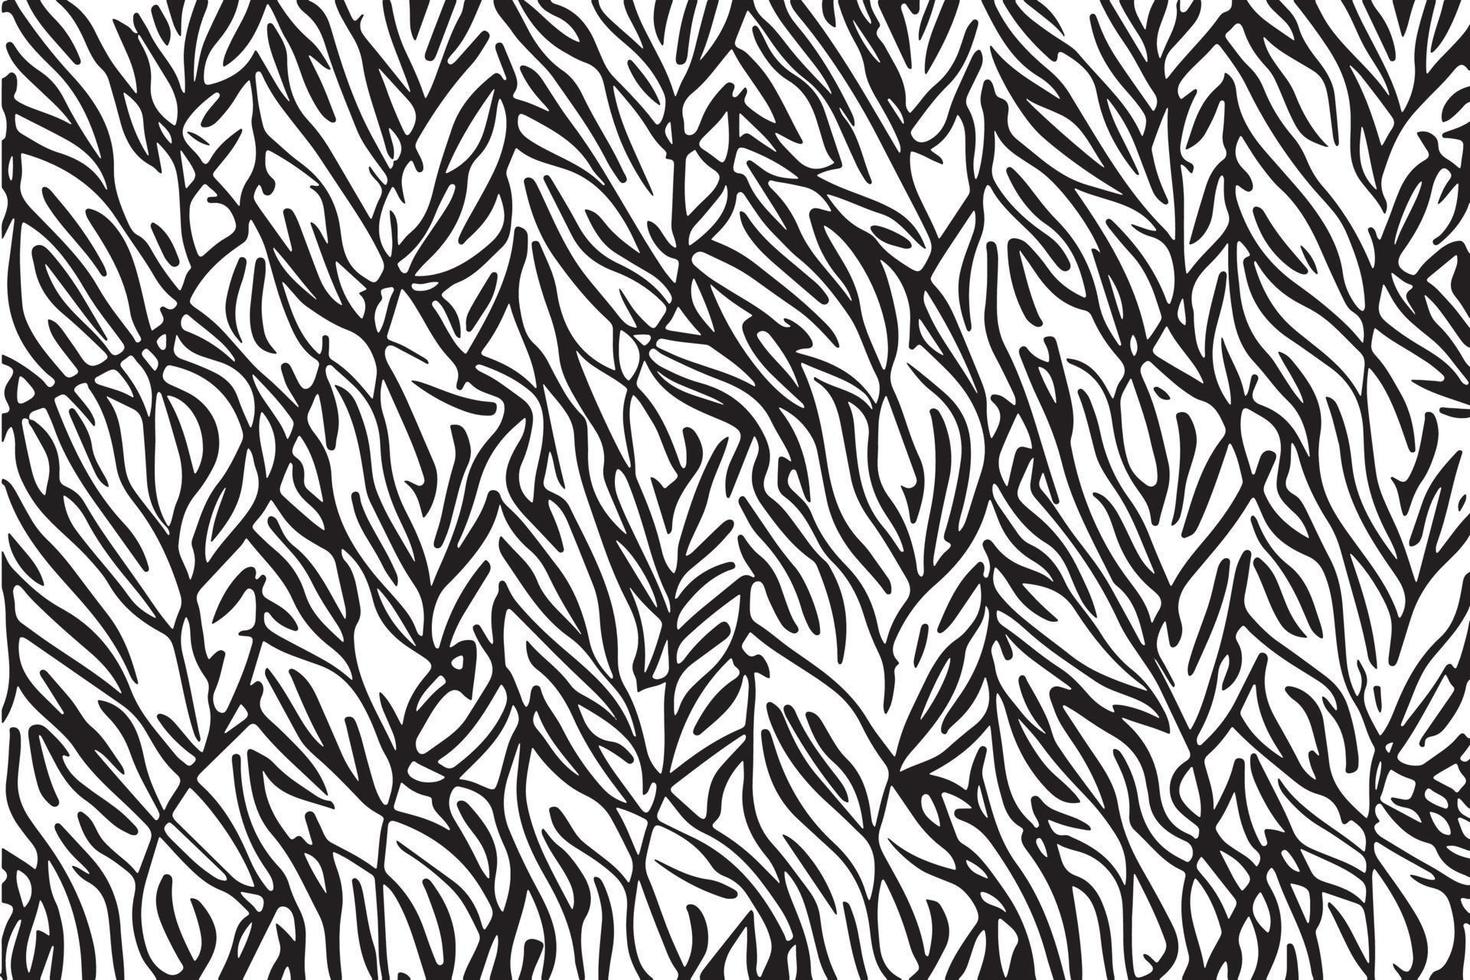 Abstract Black and White Plants Pattern vector